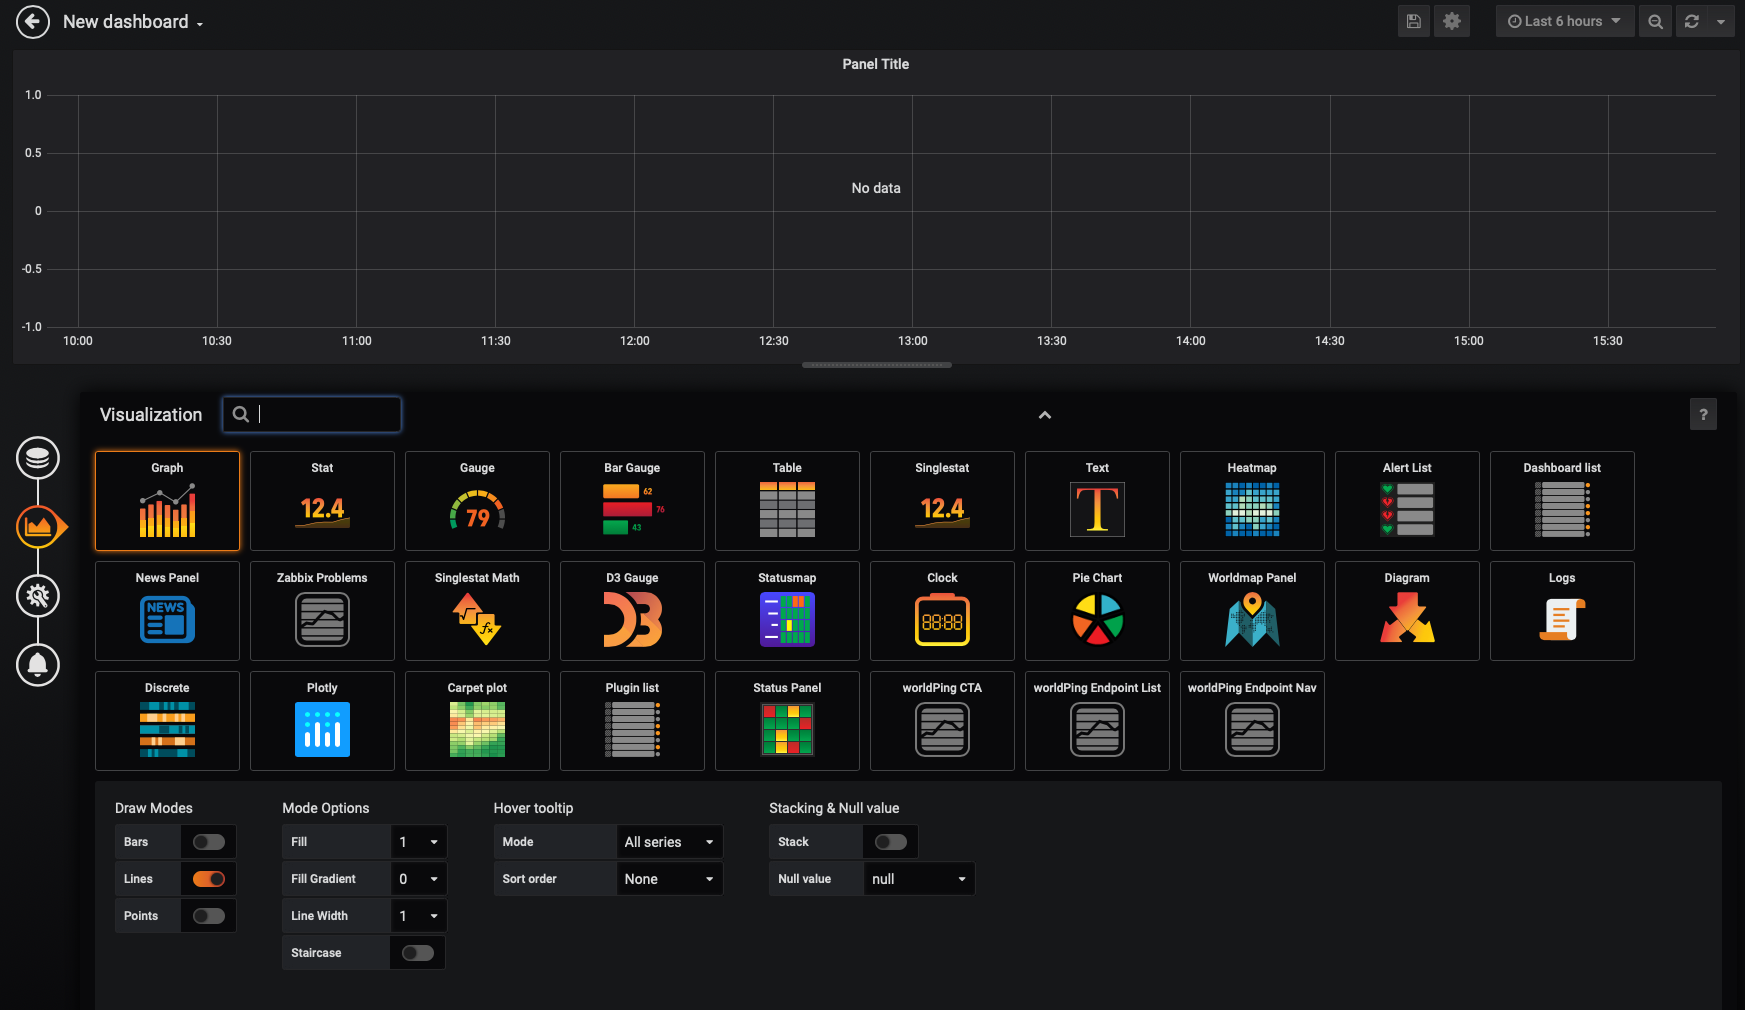 Grafana visualizations to choose from